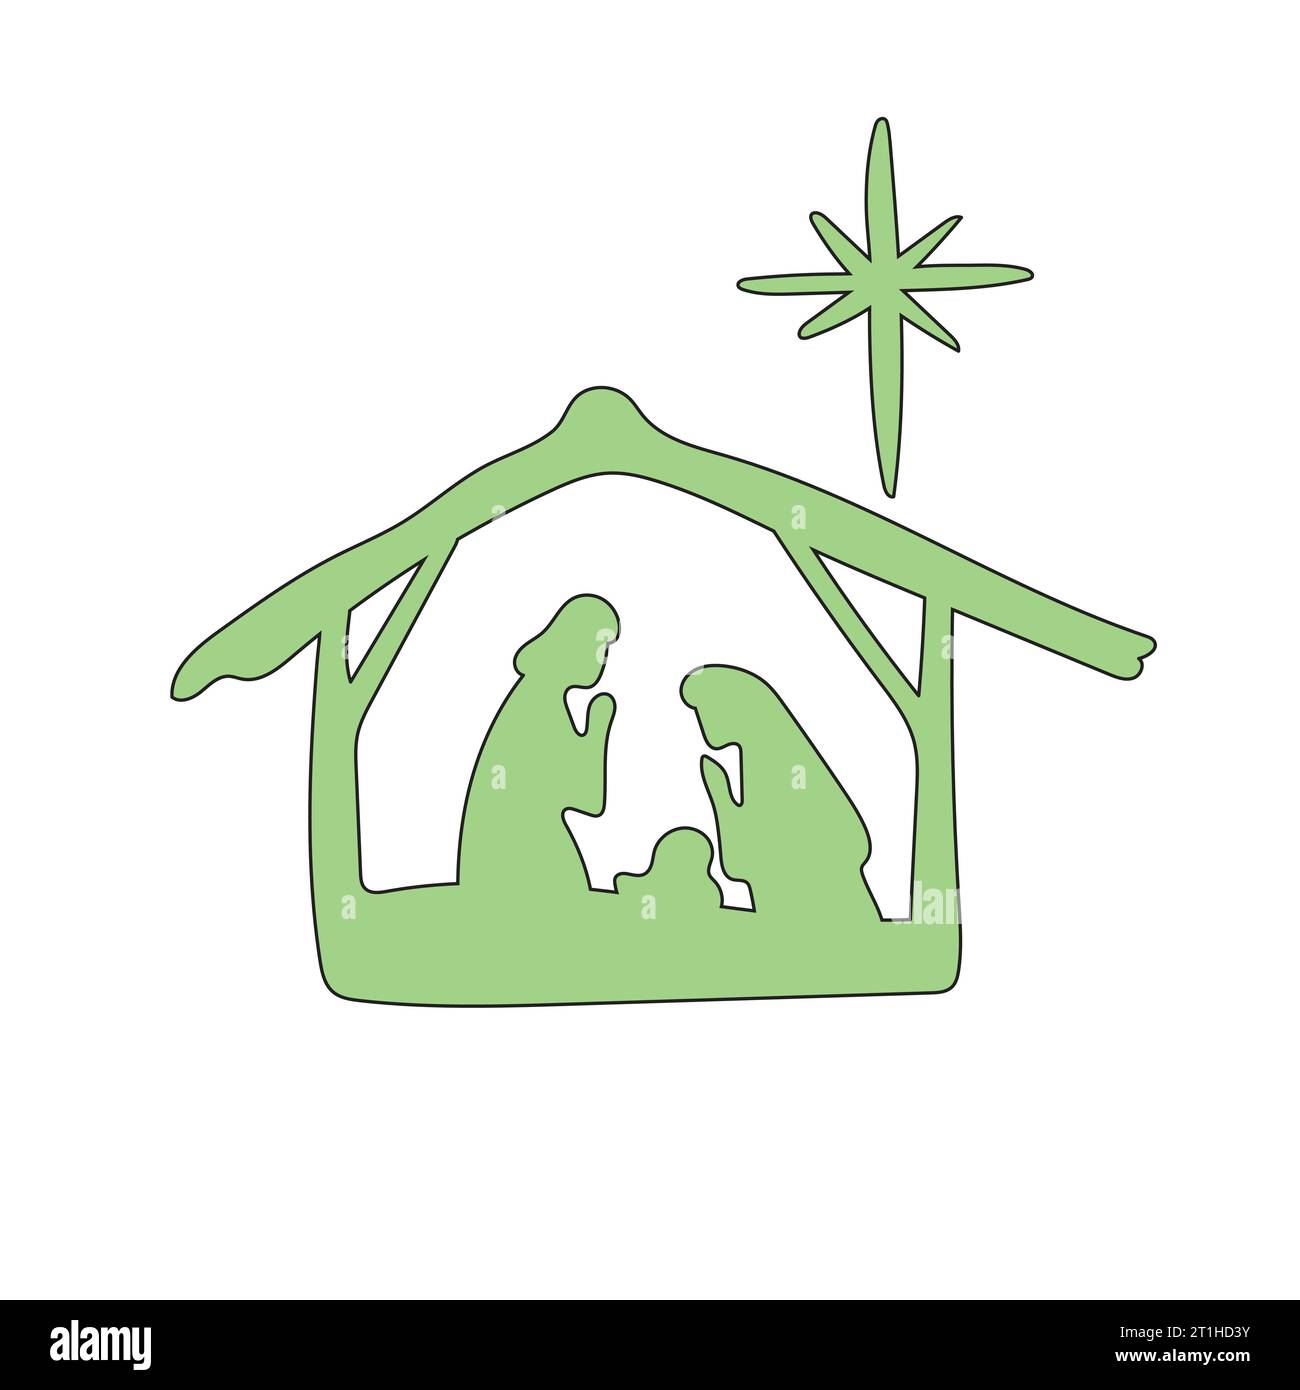 Black line drawing of born Jesus with Joseph and Mary illustration vector hand drawn Stock Vector